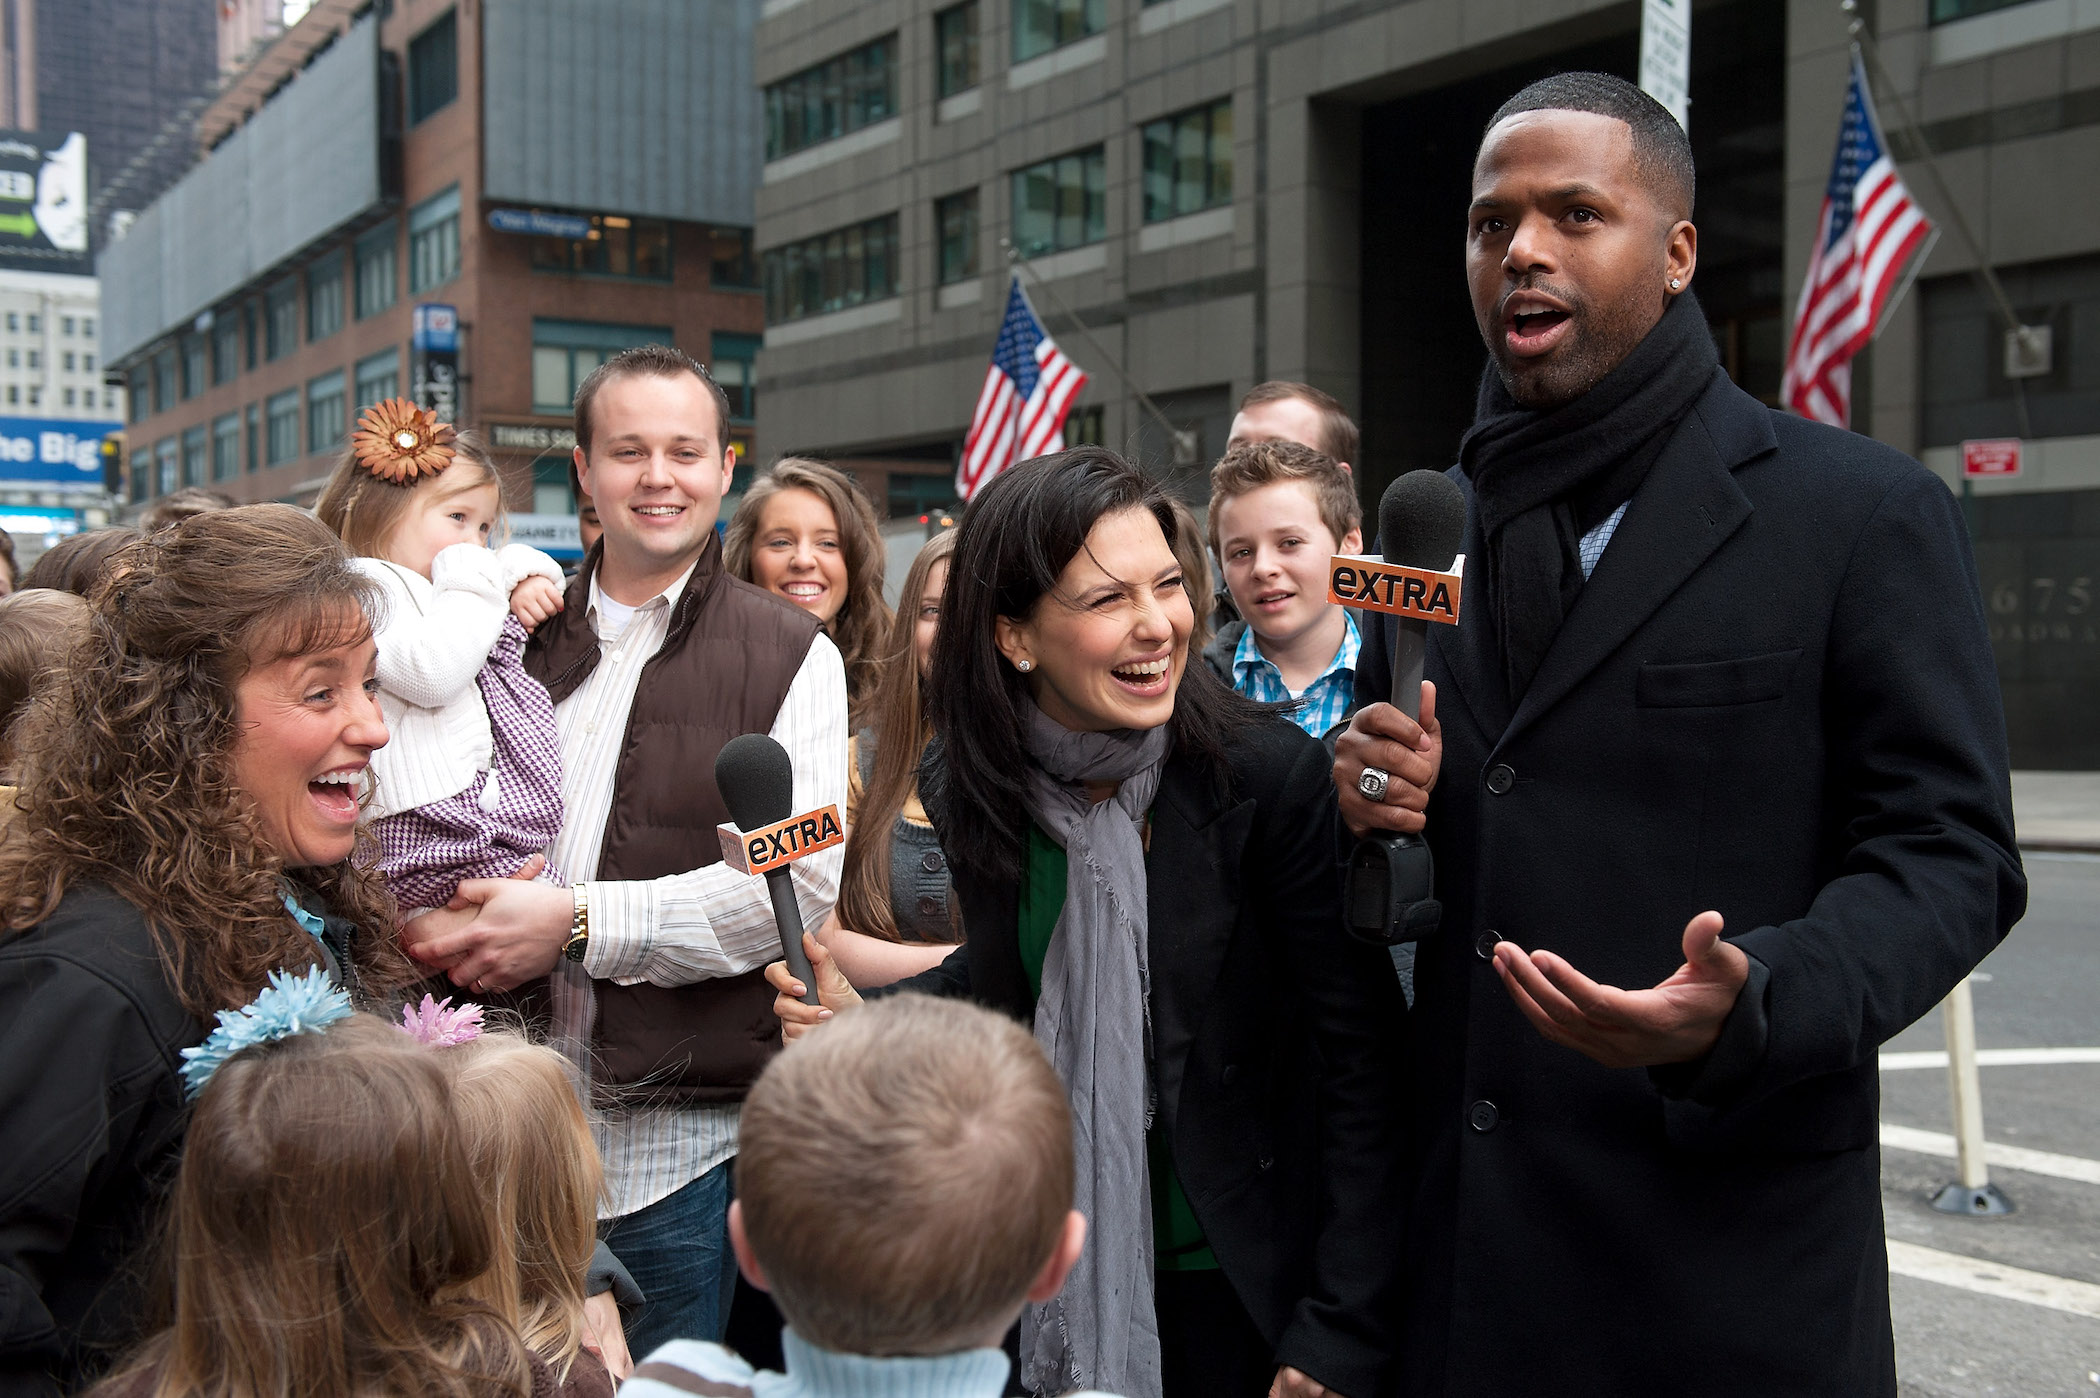 (R-L) AJ Calloway and Hilaria Baldwin interview the Duggar family outdoors. Photo shows Josh Duggar holding his daughter and Michelle Duggar laughing